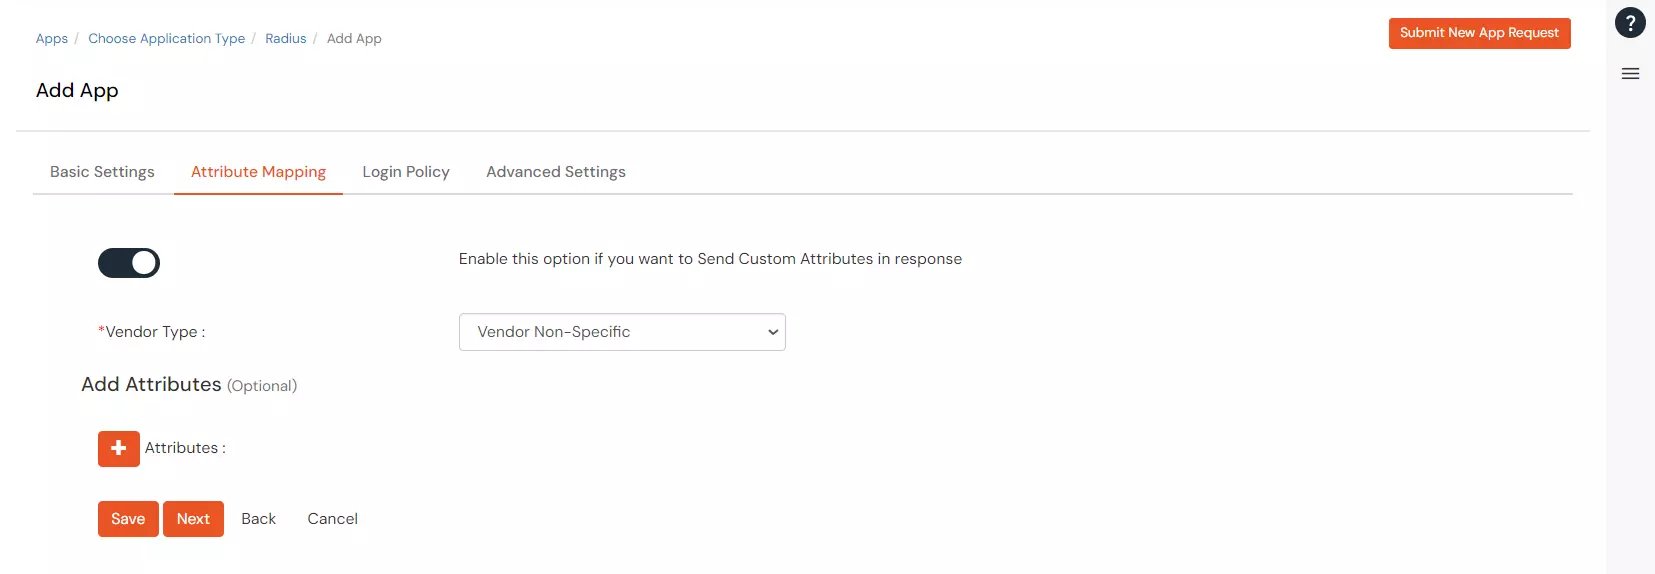 2FA Two-Factor radauthentication for SonicWall : Select your Radius Client